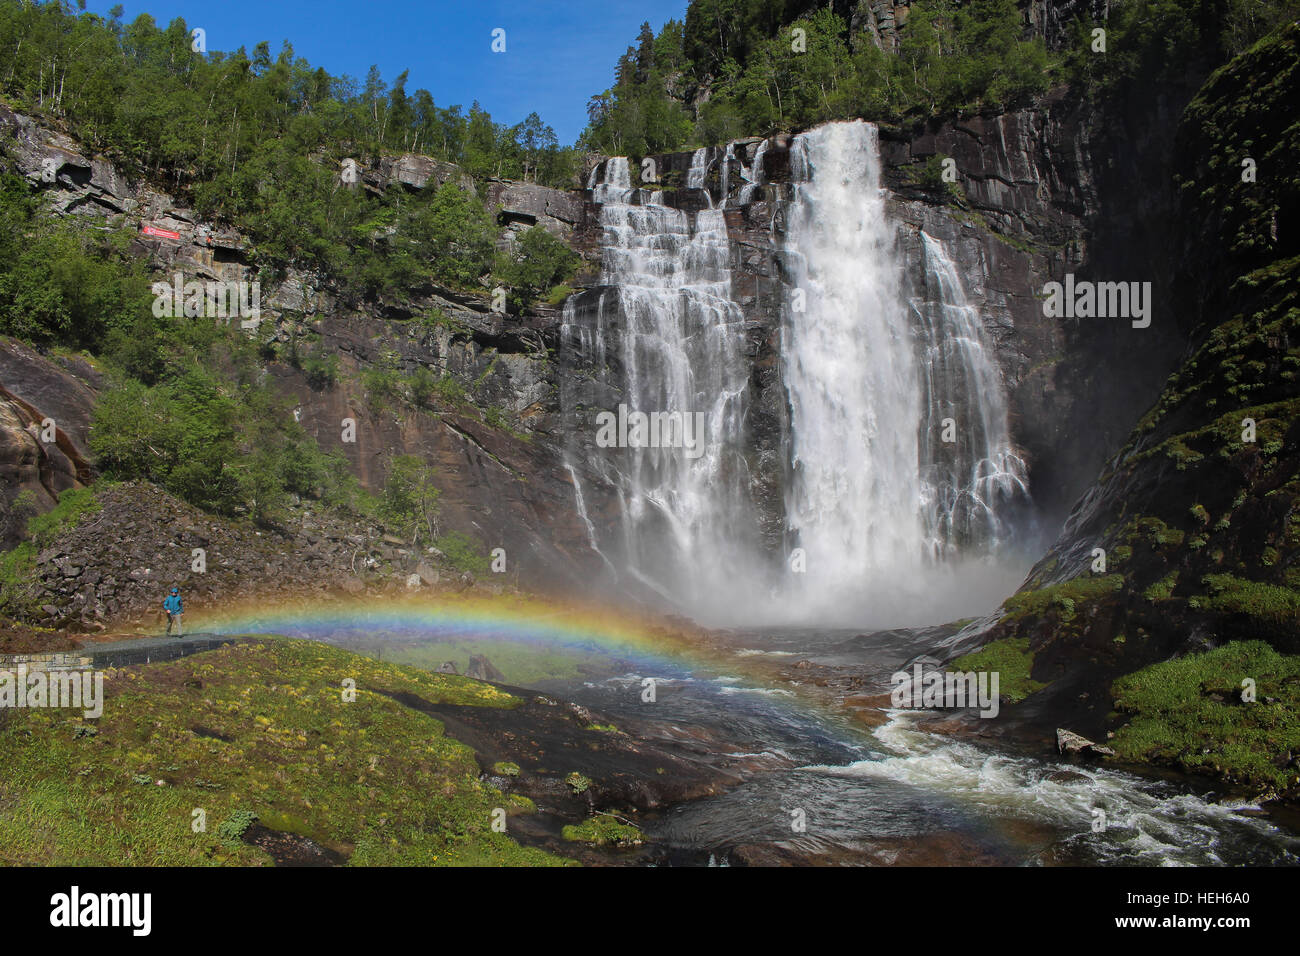 A male hiker in Norway with a rainbow and a waterfall Stock Photo